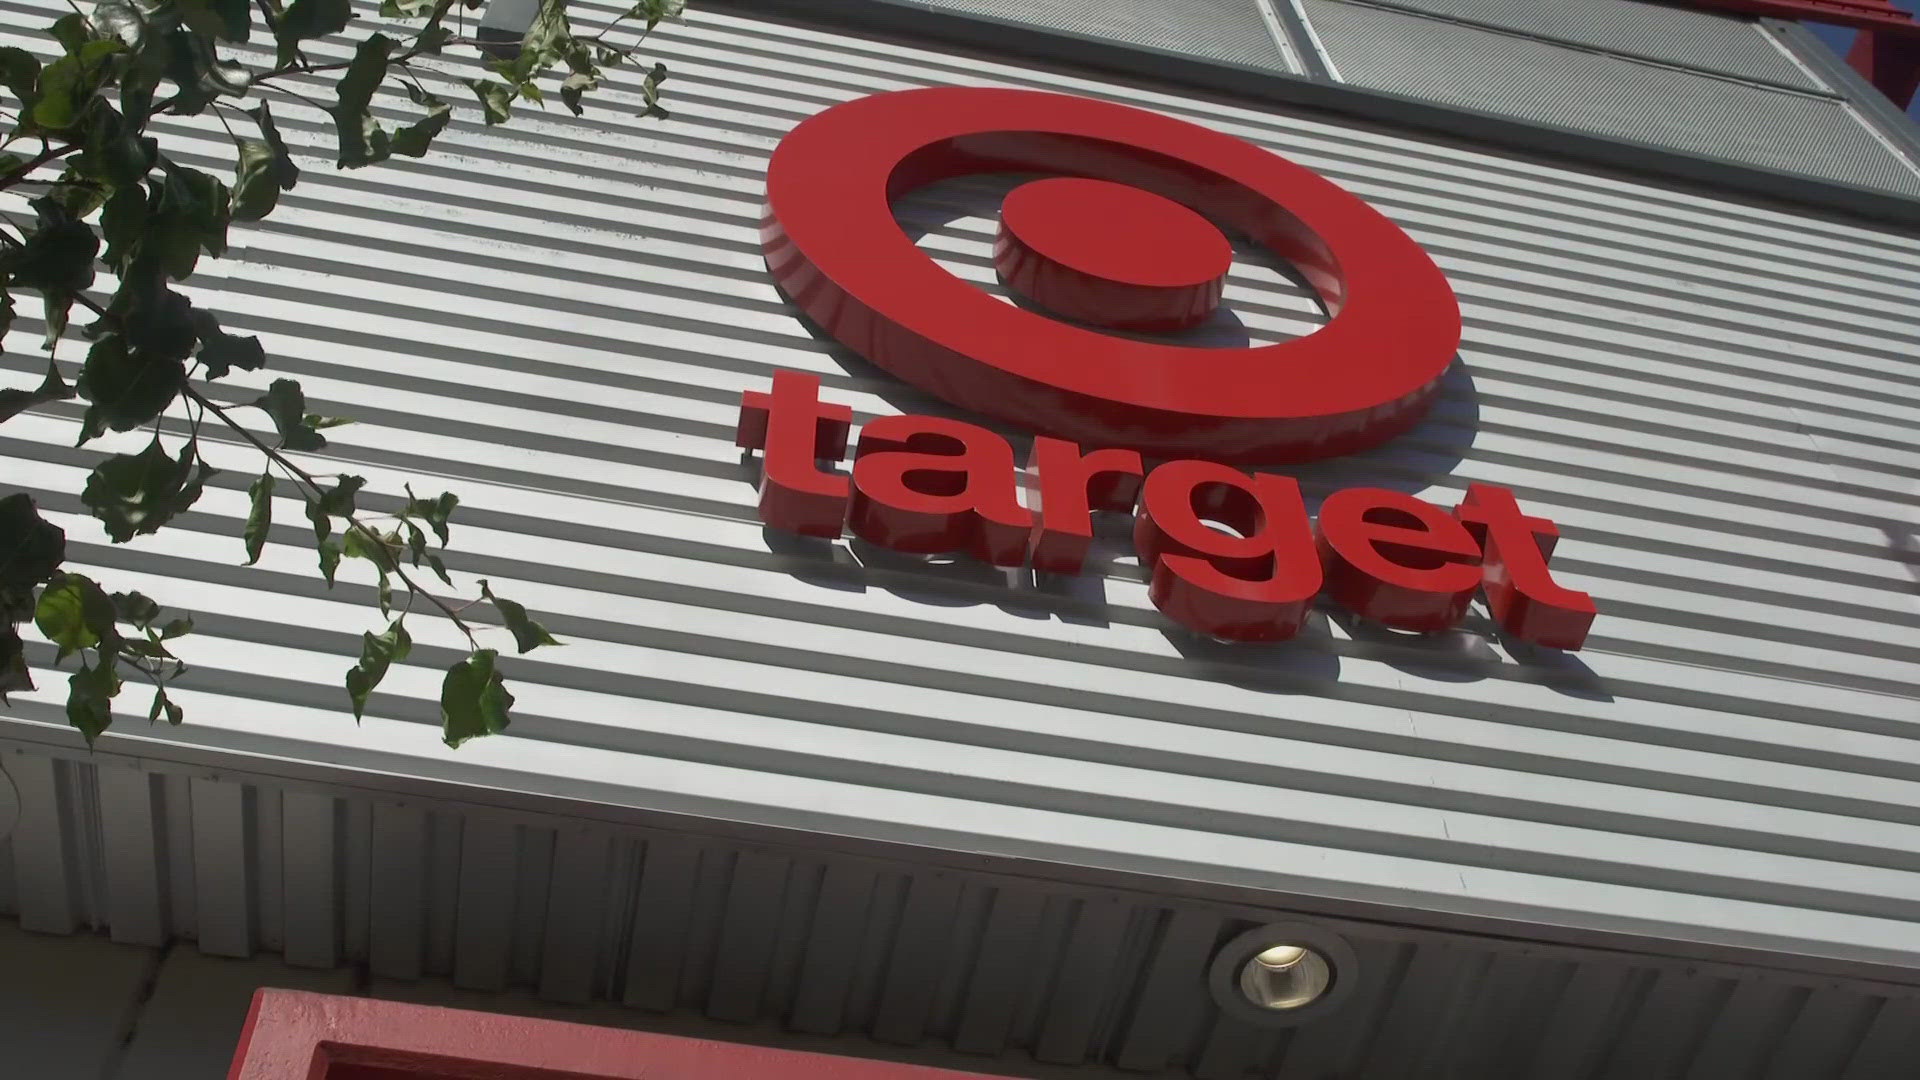 Target said there are "extremely low volumes" of customers paying by personal checks.